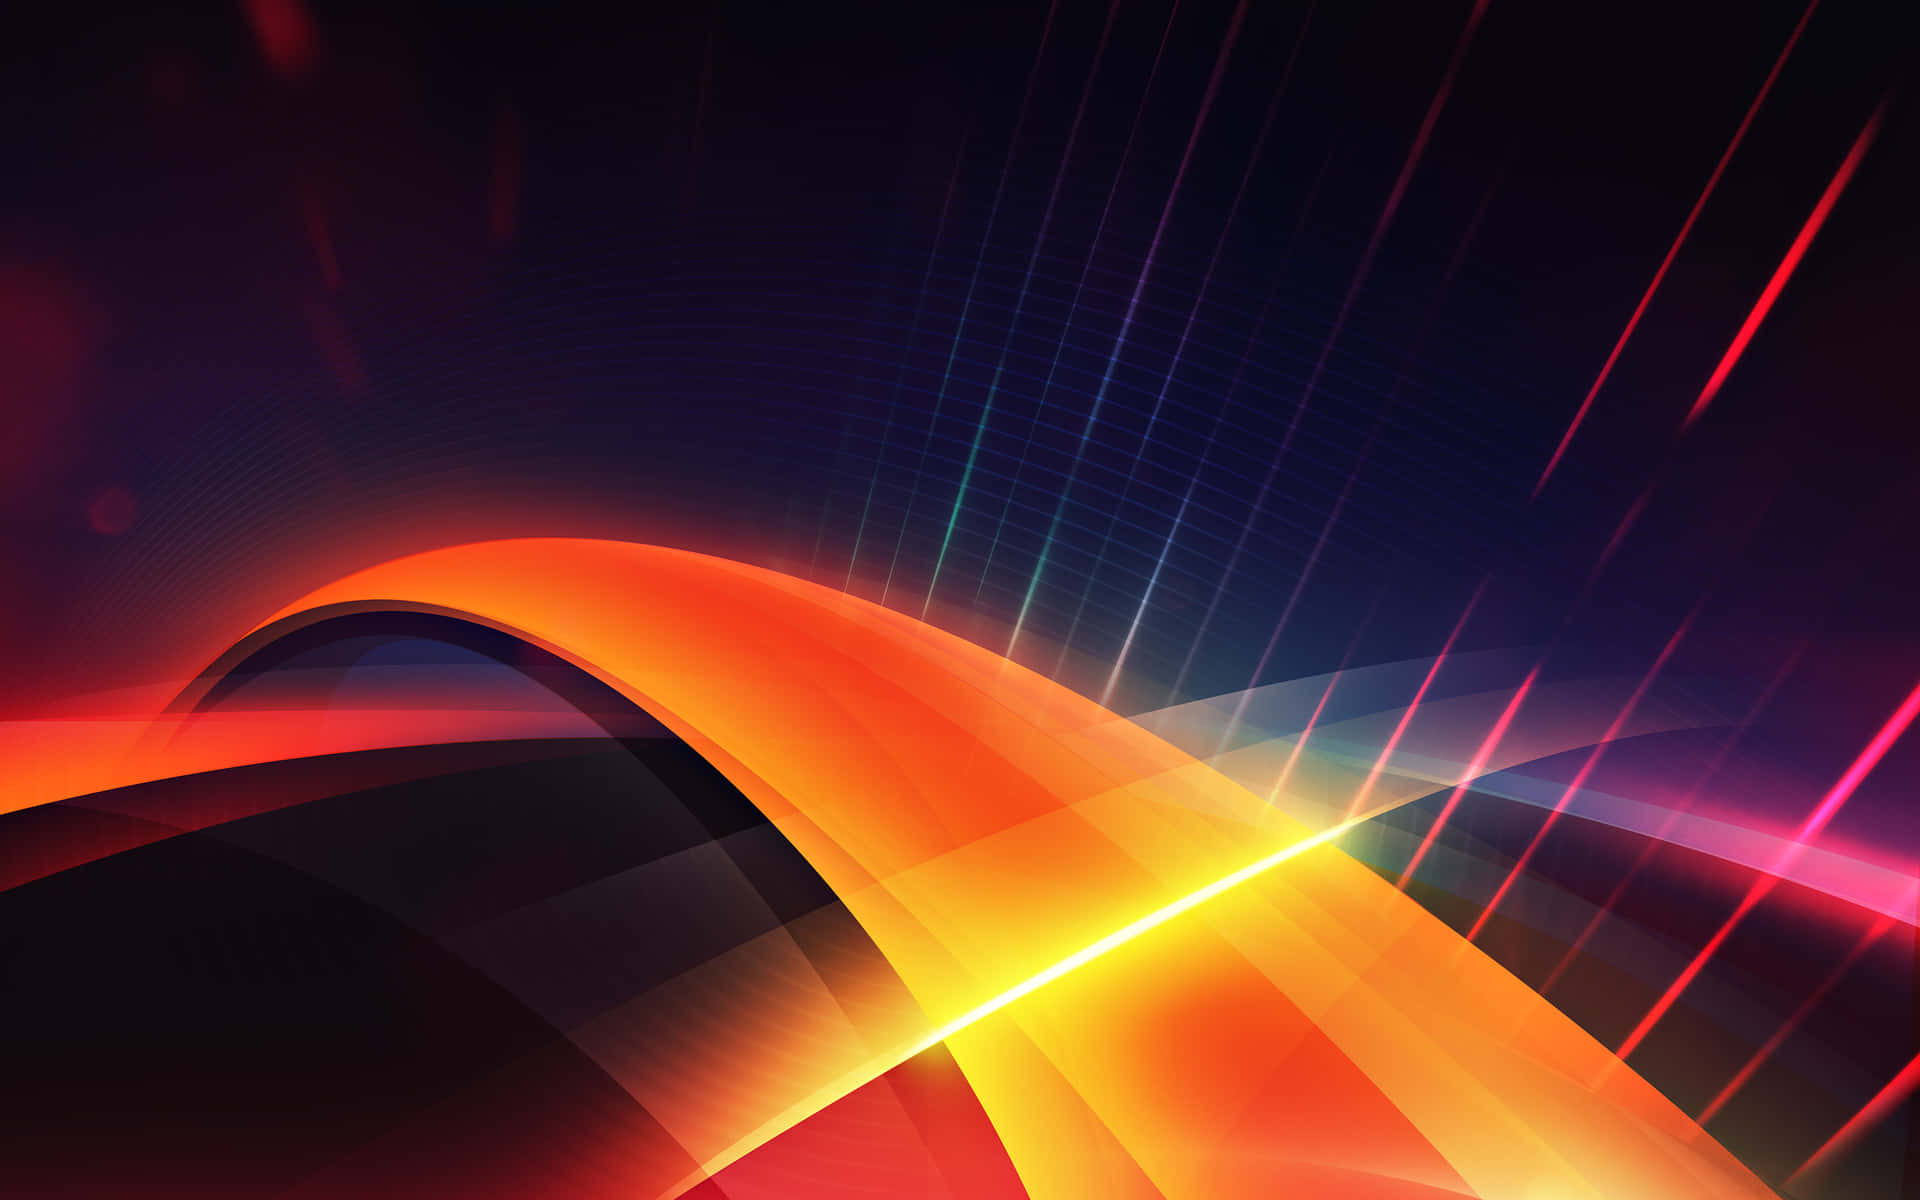 Captivating 3D Abstract Image showcasing the blend of colors and creativity Wallpaper